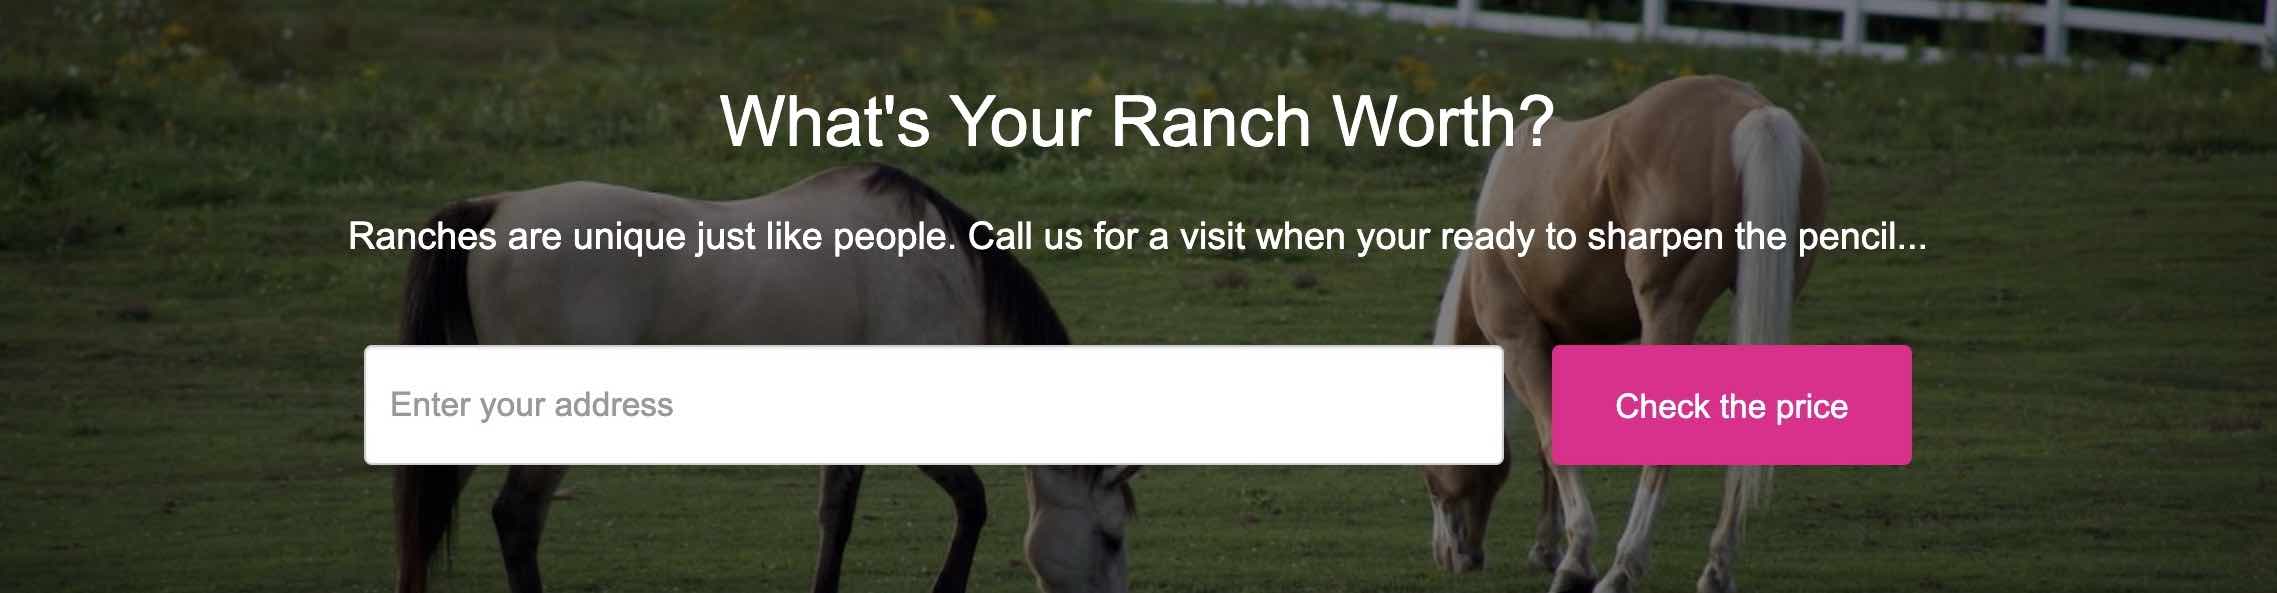 Get an instant price for your texas ranch